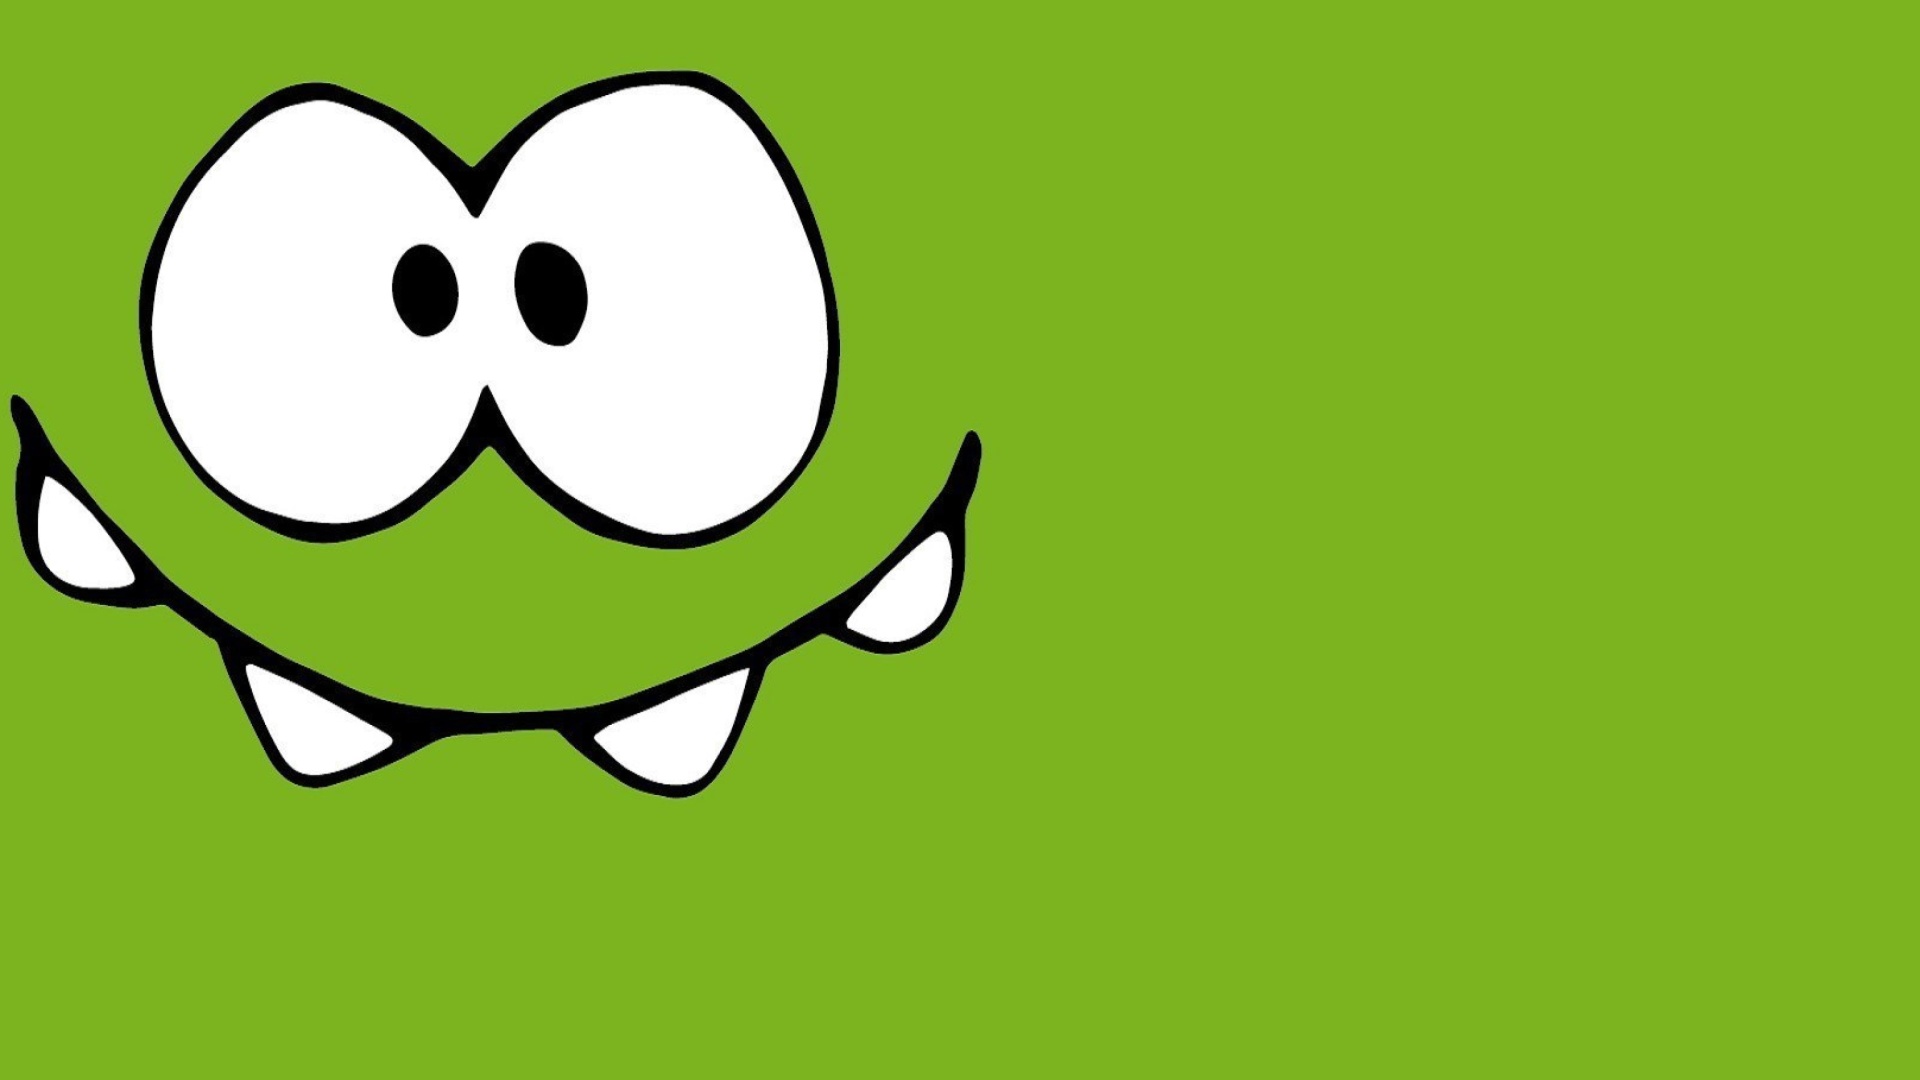 Om Nom from game Cut the Rope wallpaper 1920x1080